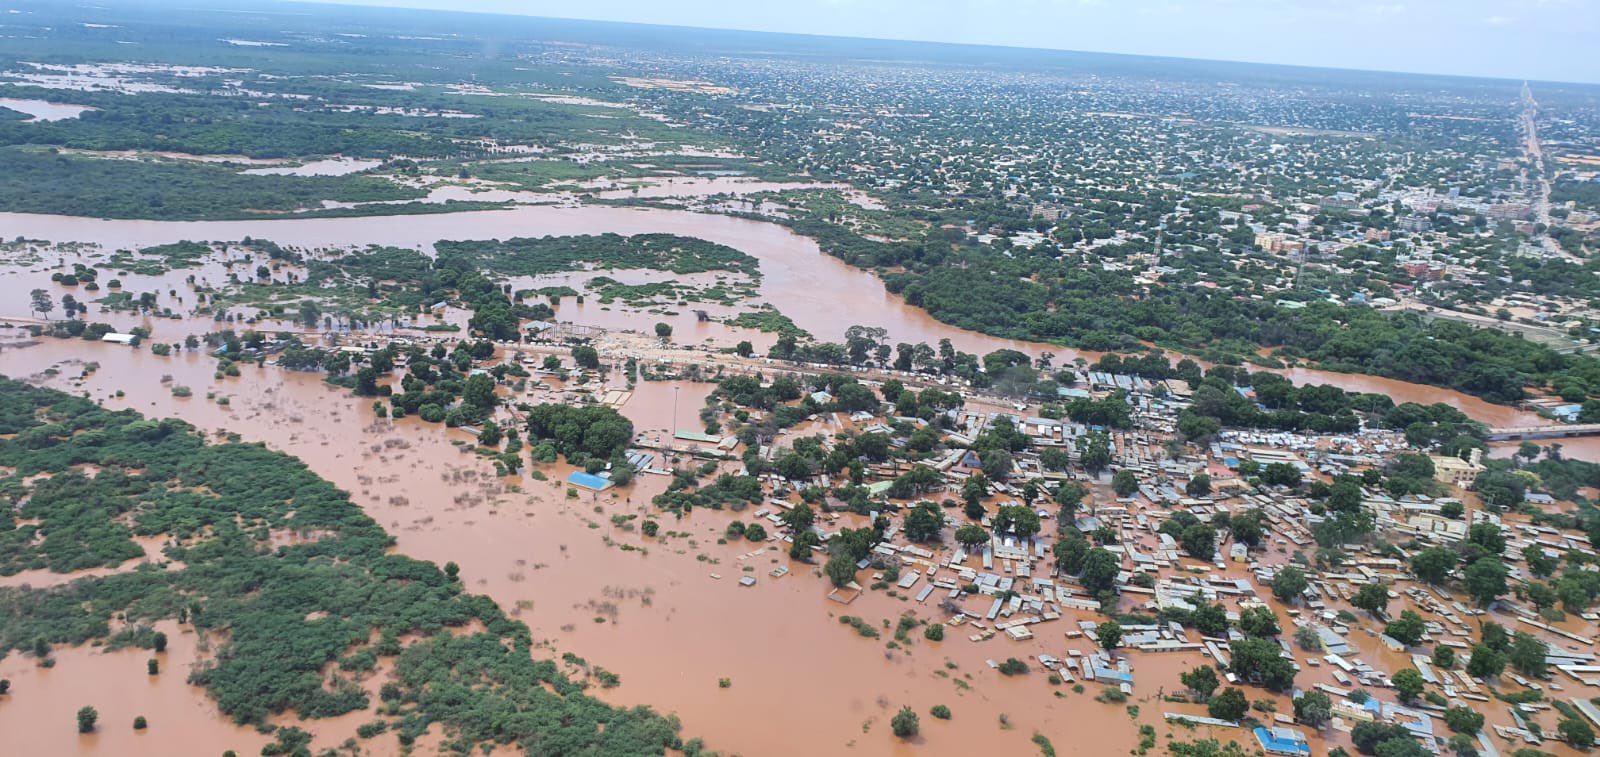 Garissa faces water crisis as company halts supply after flooding hit vital sources